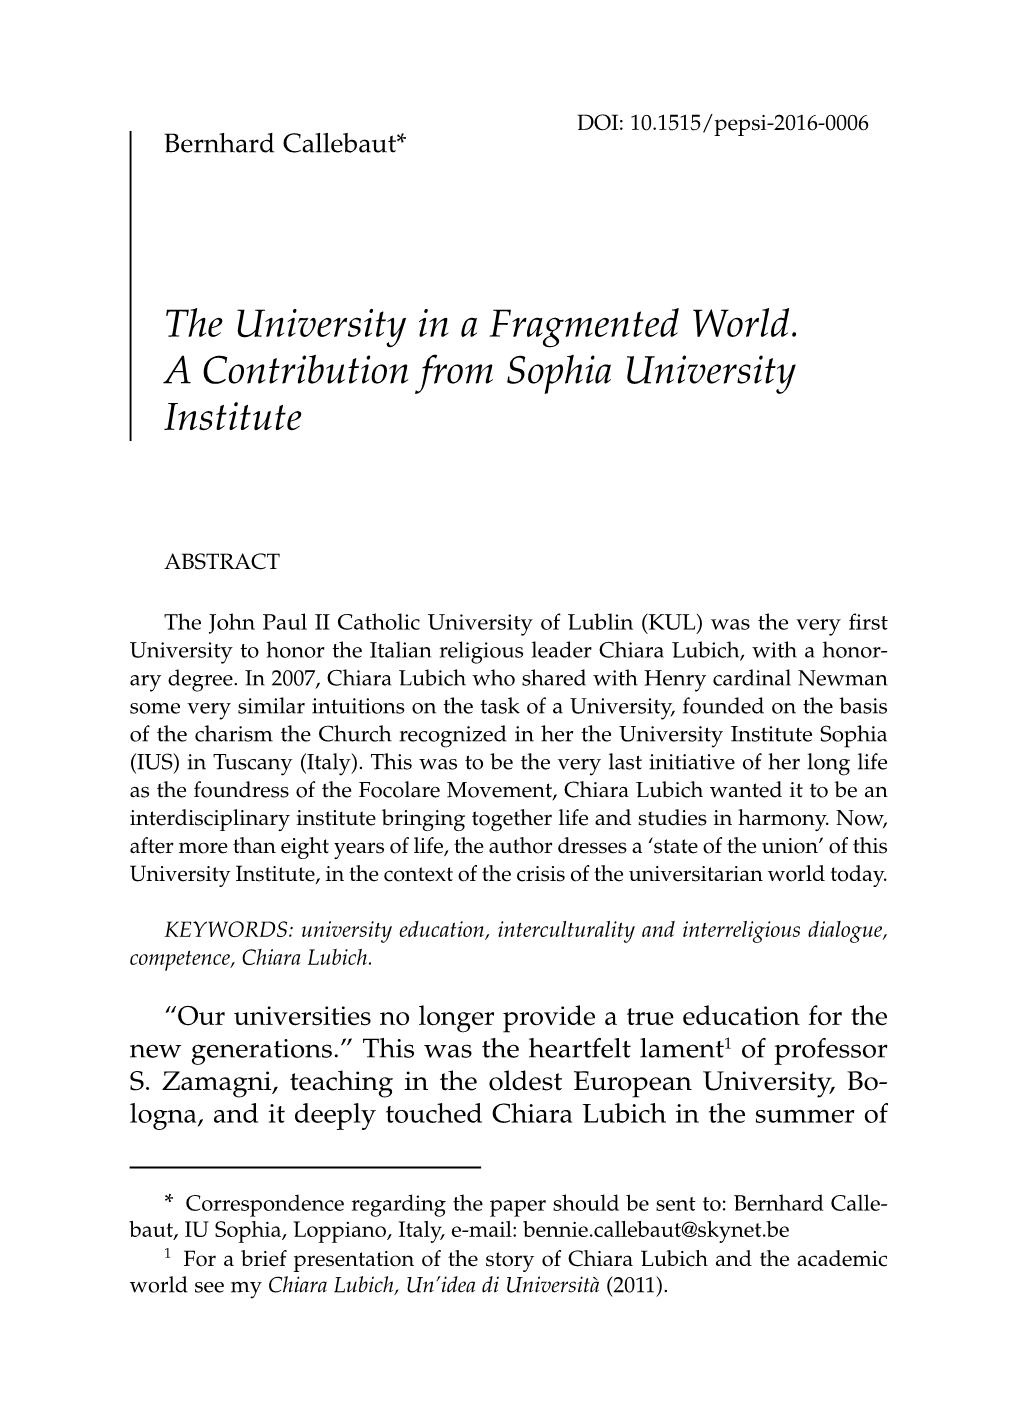 The University in a Fragmented World. a Contribution from Sophia University Institute